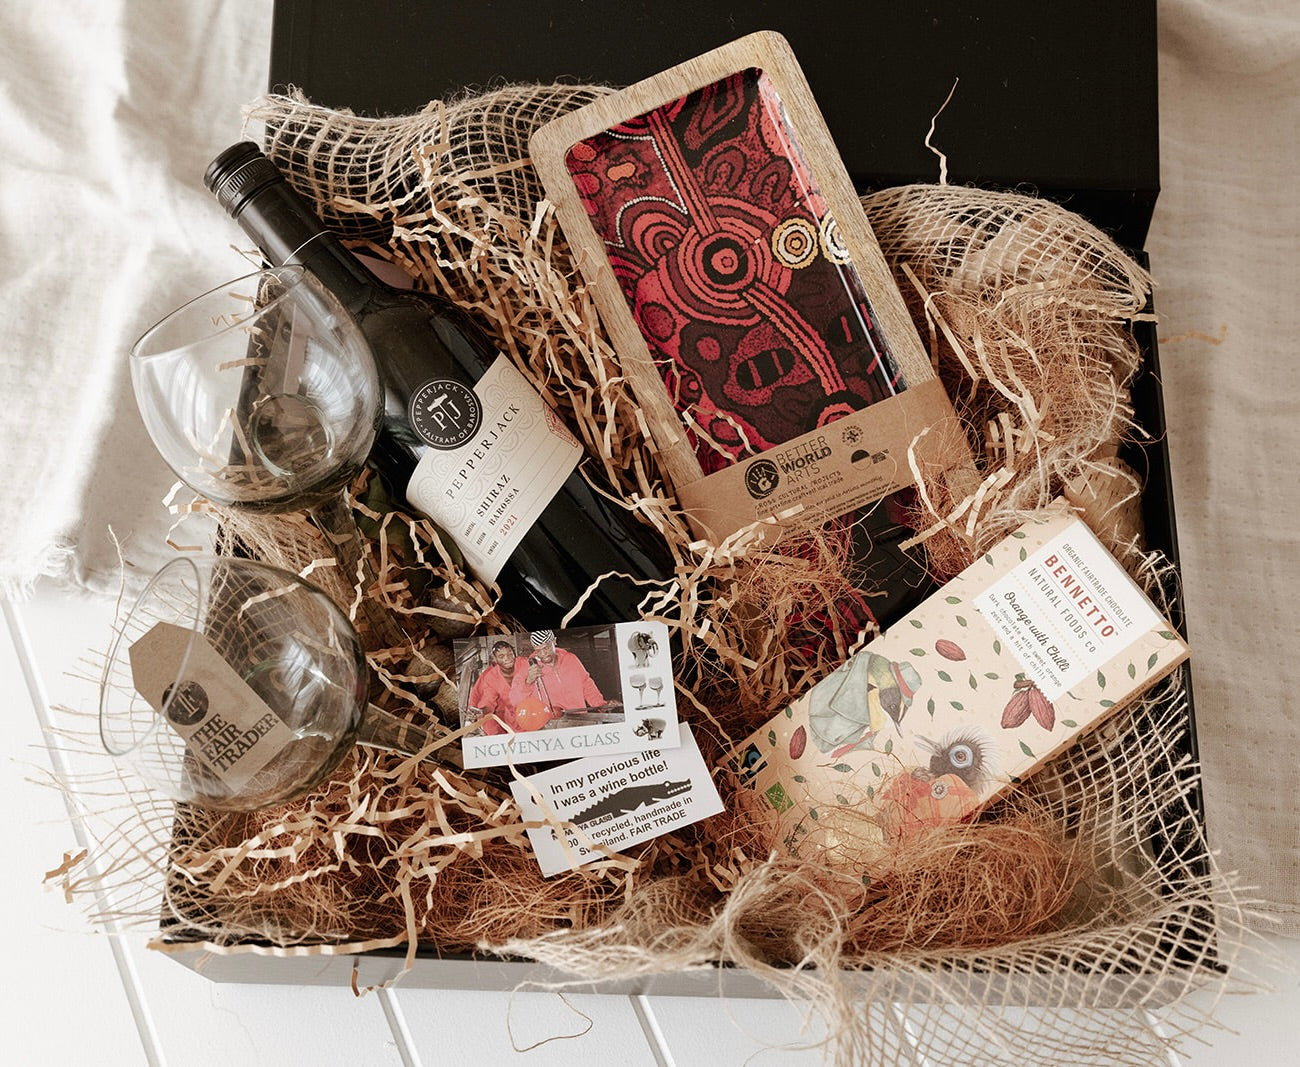 Melbourne corporate hamper - red wine, eco friendly wine glasses, Indigenous art wooden plate, Fairtrade chocolate in sustainable gift box